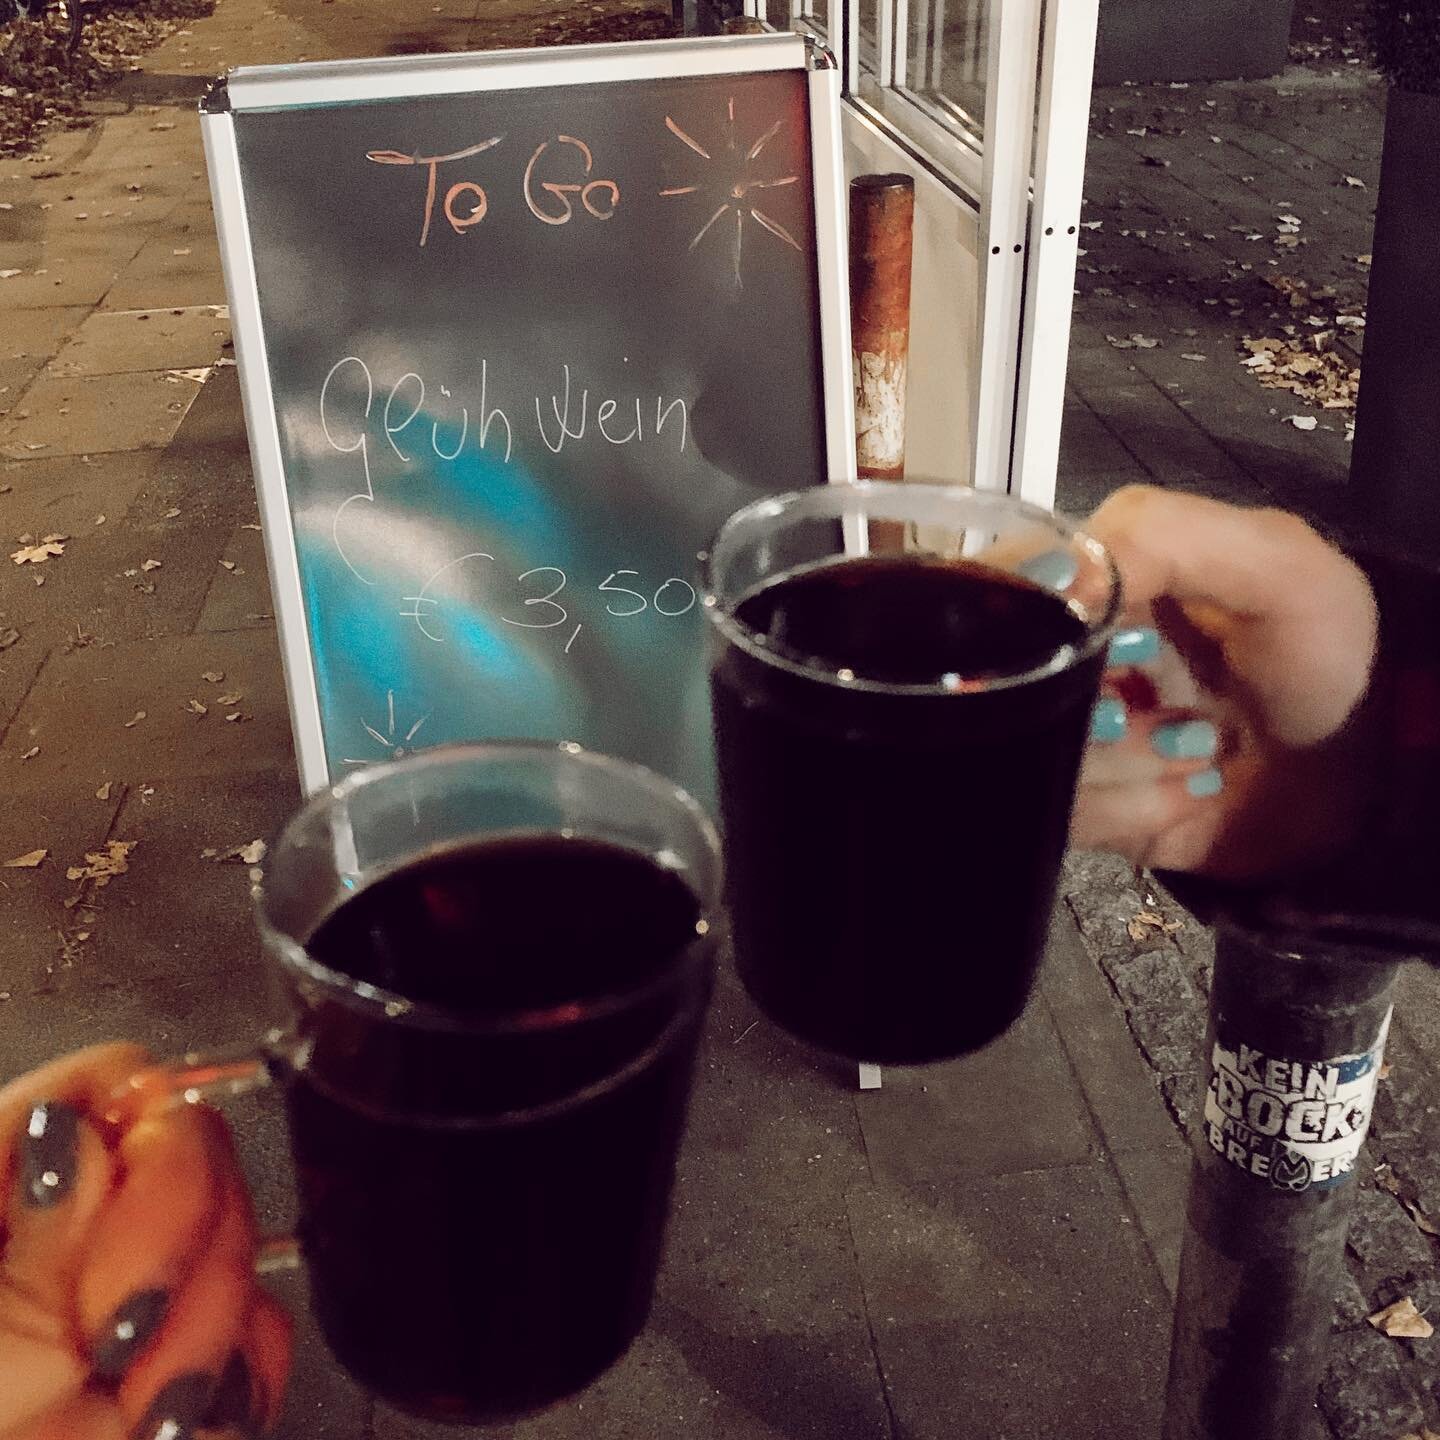 Glühwein To-Go Map - Swipe Right 👉🏼
 Just because there is a lockdown, doesn&rsquo;t mean we can&rsquo;t get creative with our fun! ✨

This week I saw a lot of &lsquo;Glühwein To-Go&rsquo; Places popping up around Hamburg in Eimsbüttel/Hoheluft/